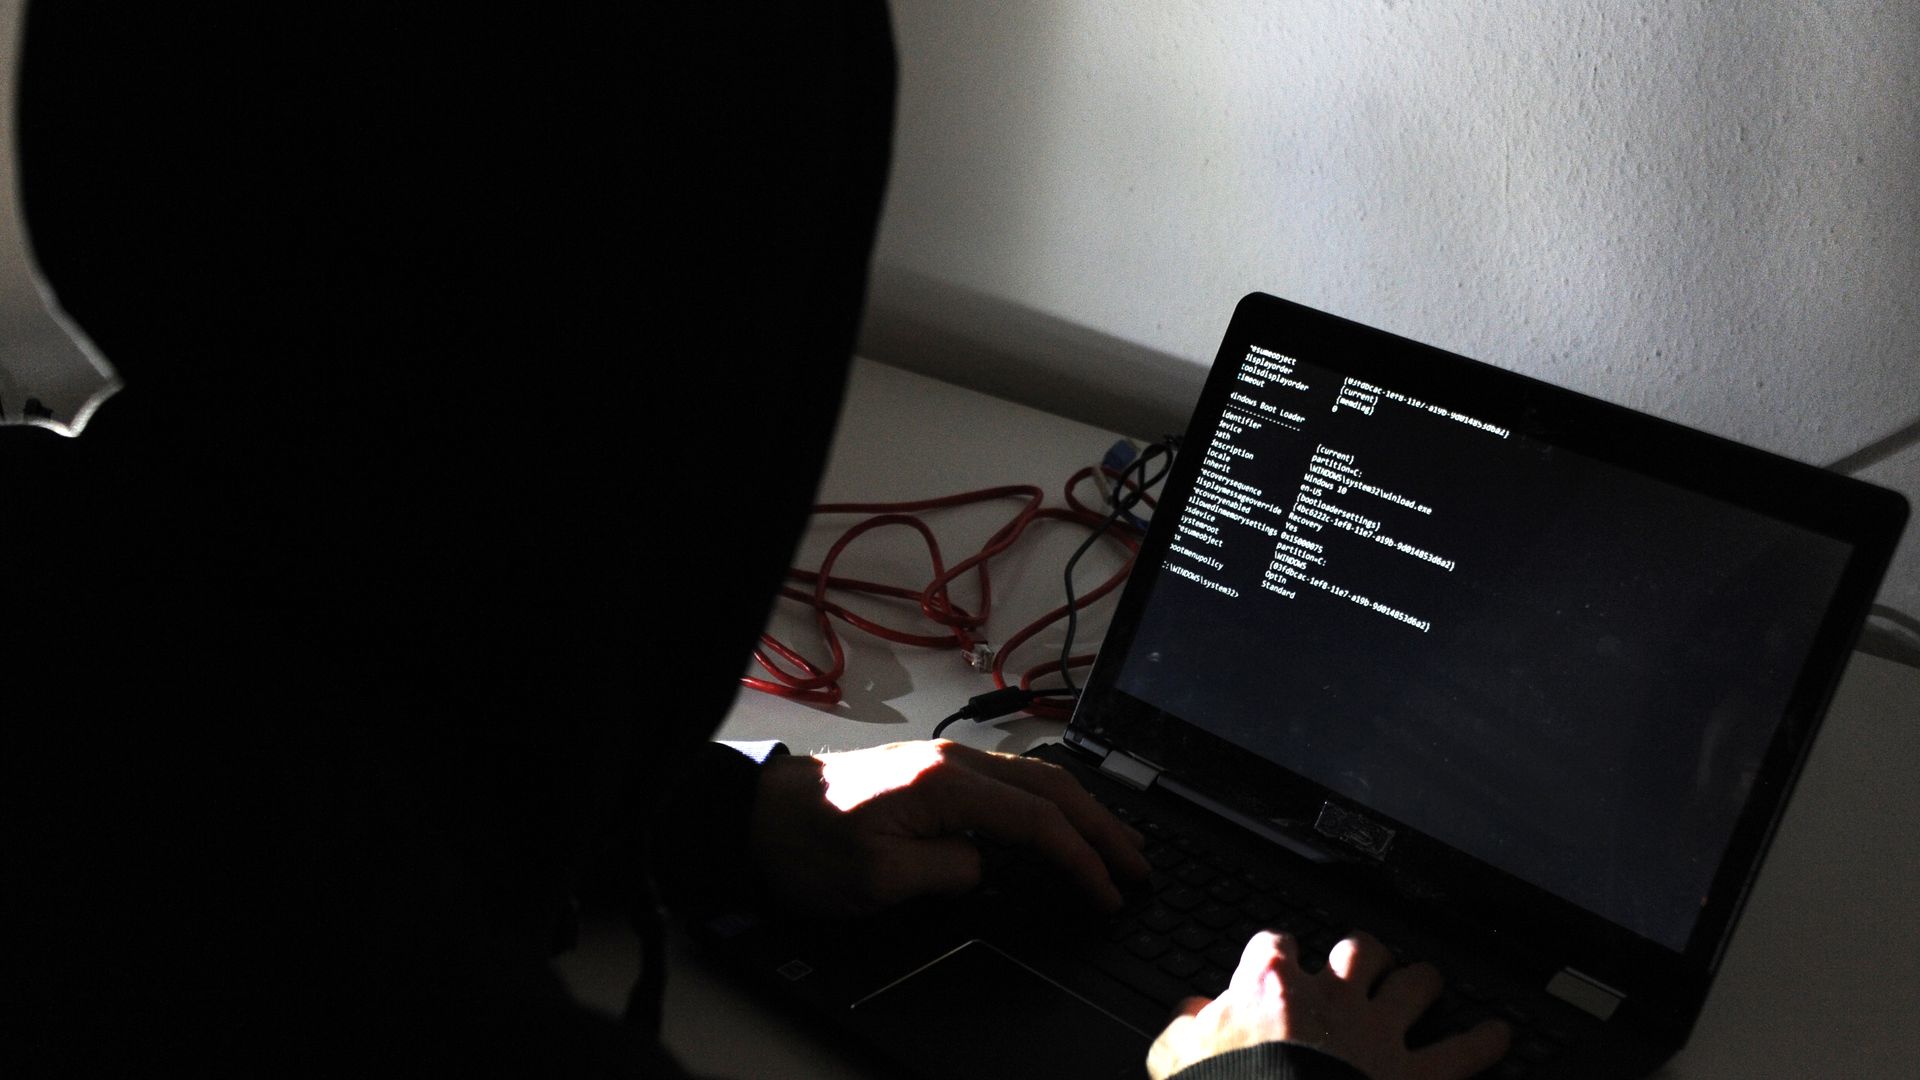 A man in a hoodie types on a black computer in darkness.